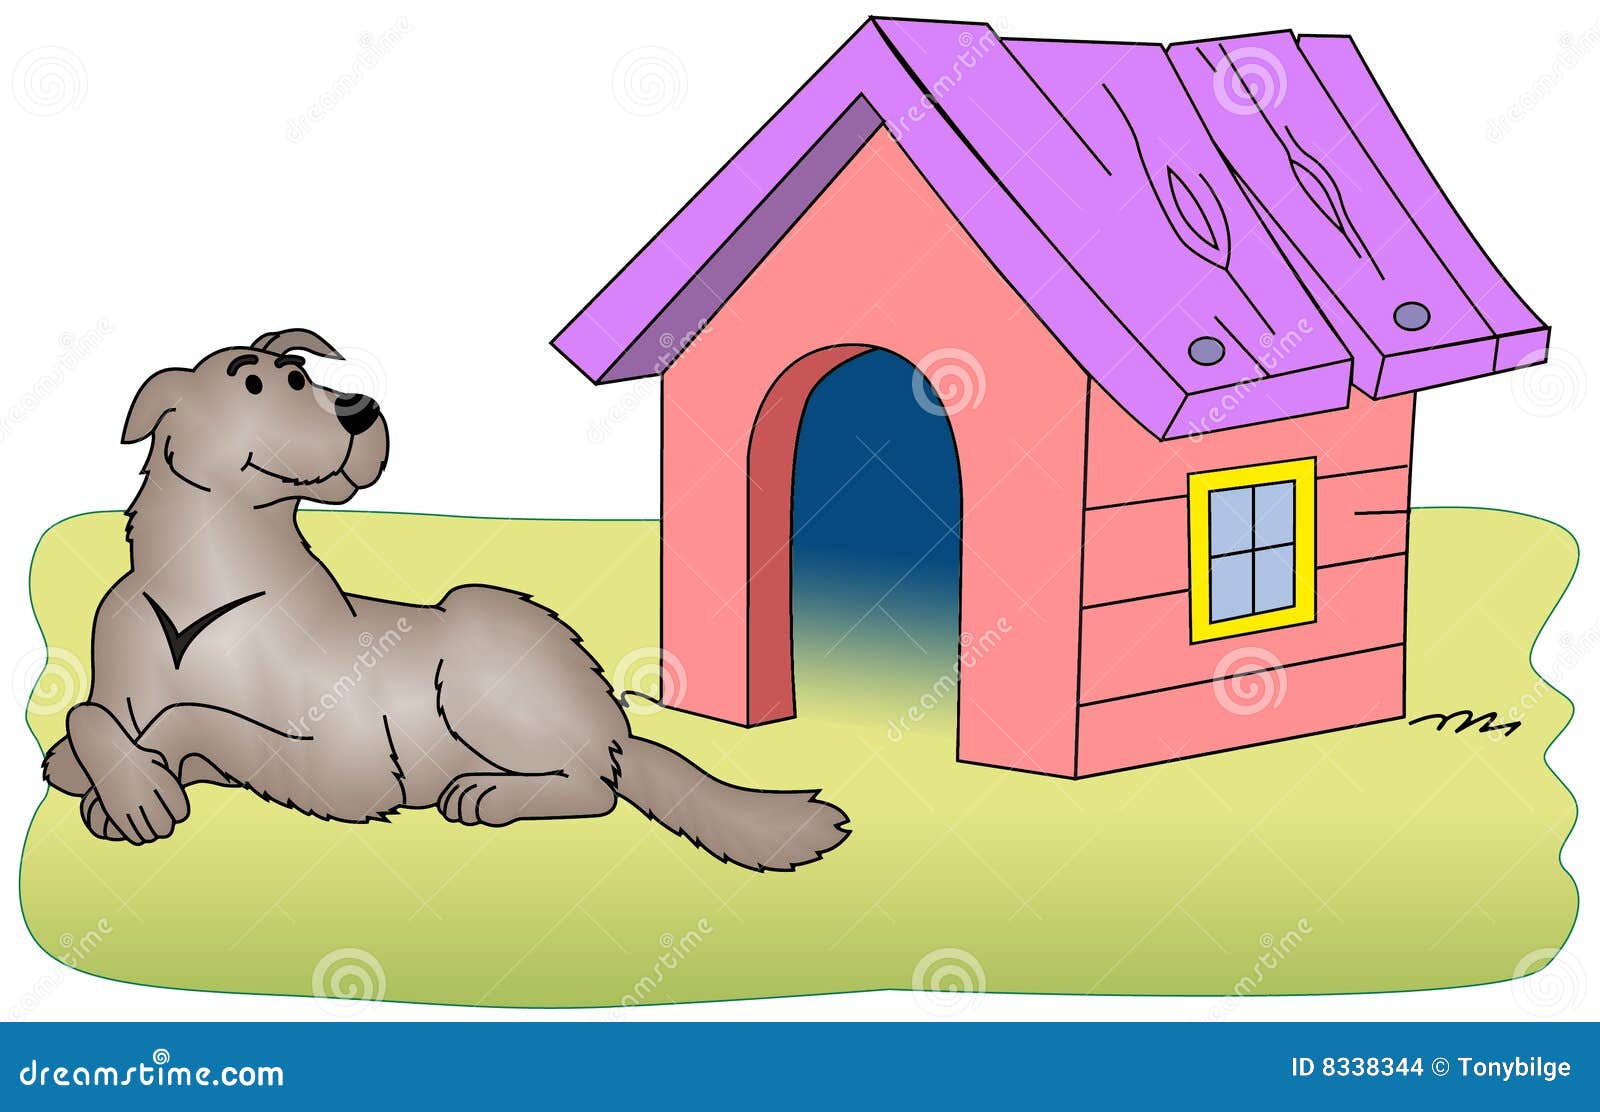 dog kennel clipart - photo #26